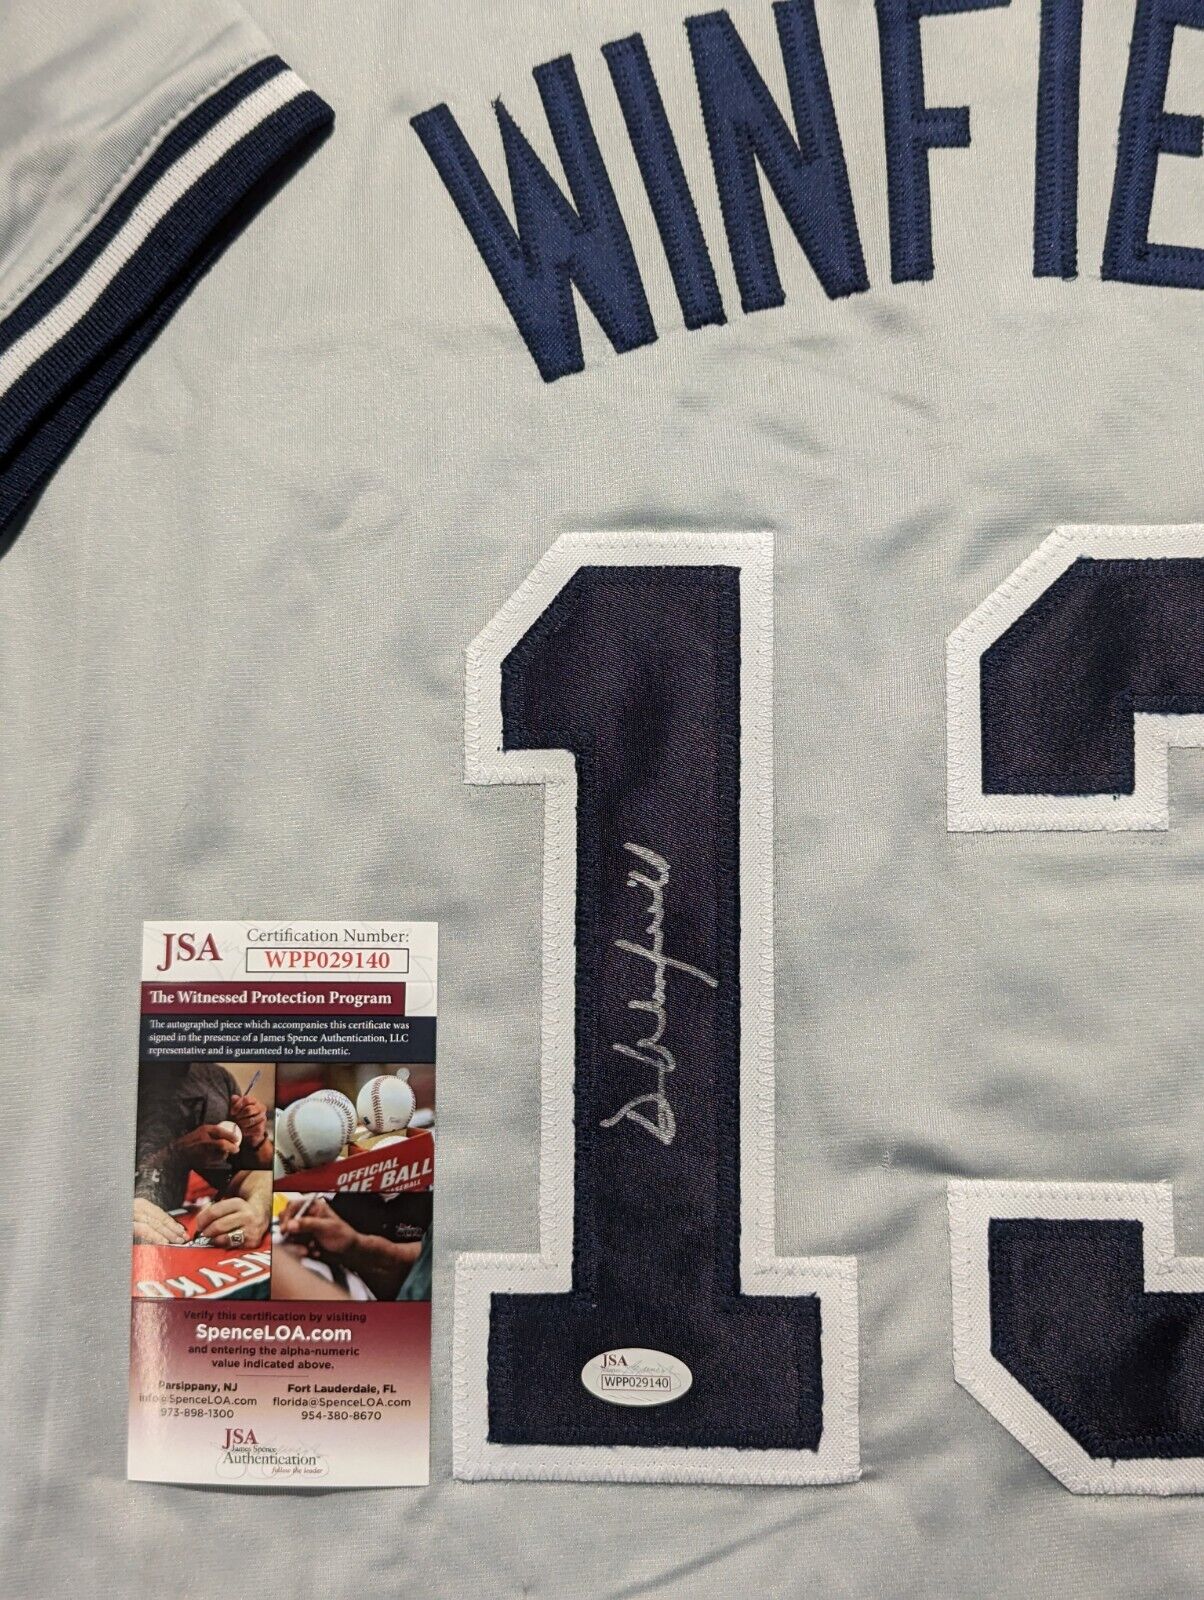 N.Y. Yankees Style Dave Winfield Autographed Signed Custom Jersey